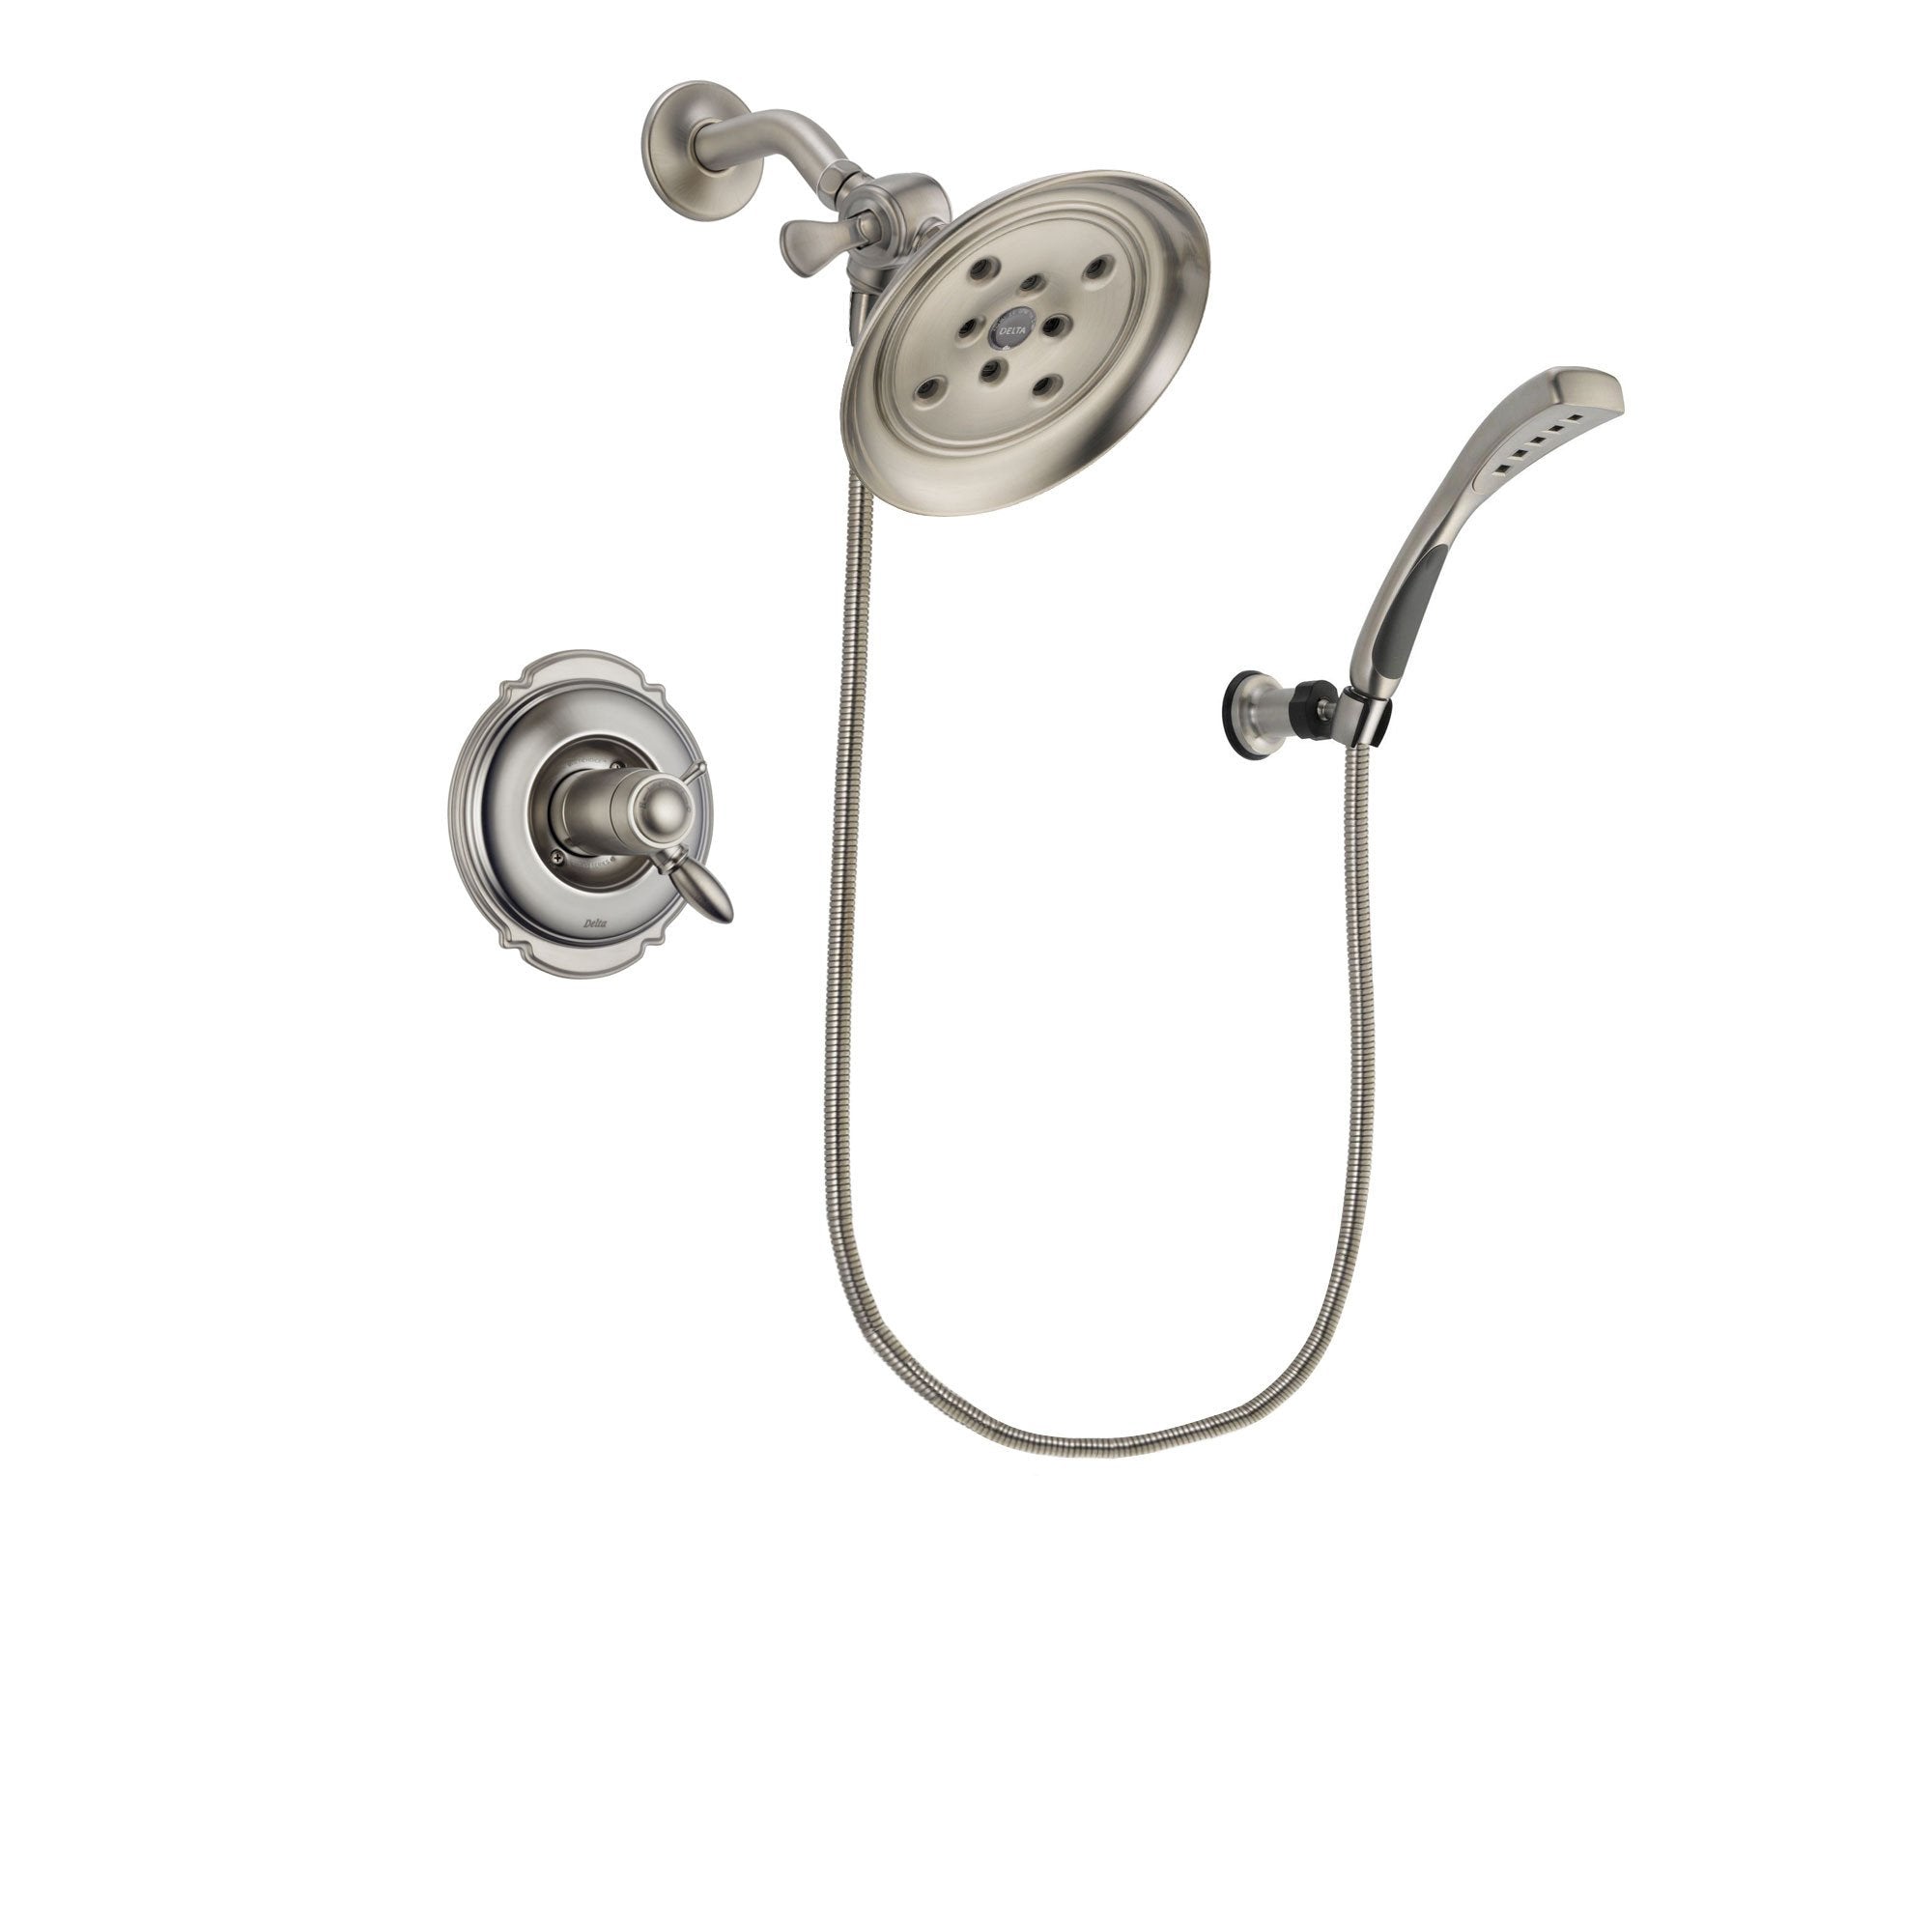 Delta Victorian Stainless Steel Finish Thermostatic Shower Faucet System Package with Large Rain Showerhead and Wall Mounted Handshower Includes Rough-in Valve DSP1856V